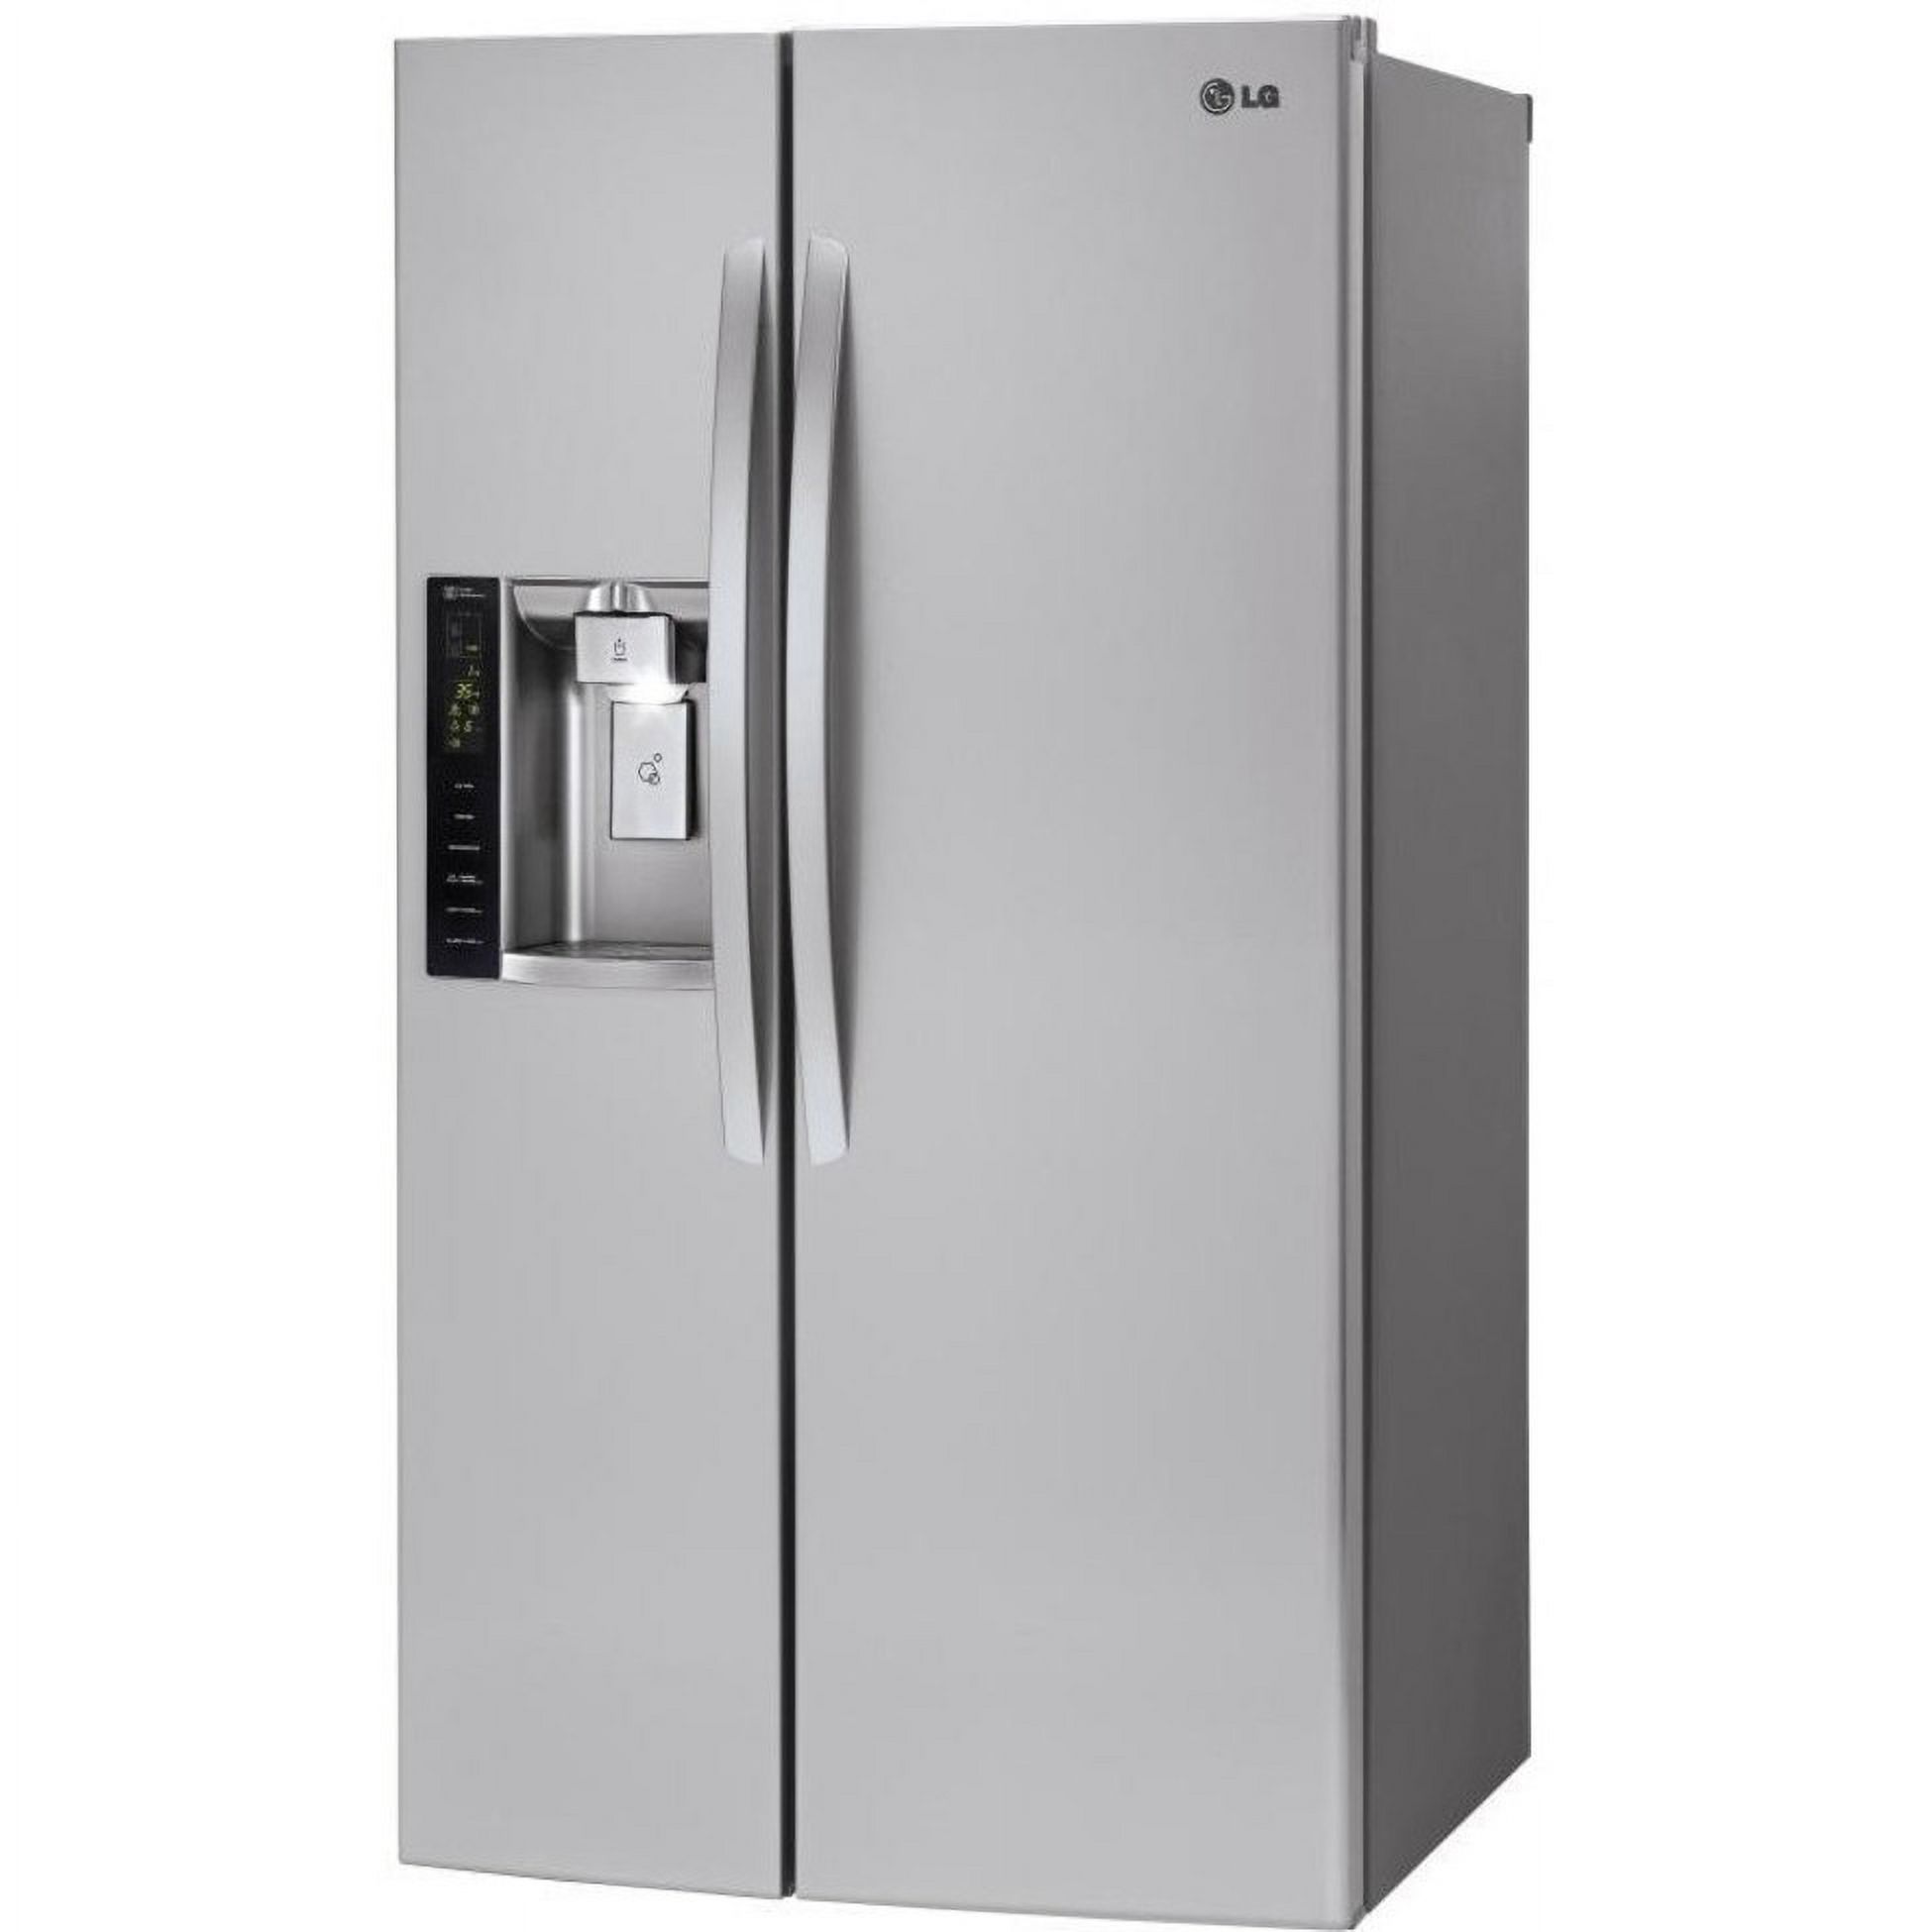 LG 22 cu. ft. Smart wi-fi Enabled Side-by-Side Counter-Depth Refrigerator - image 2 of 10